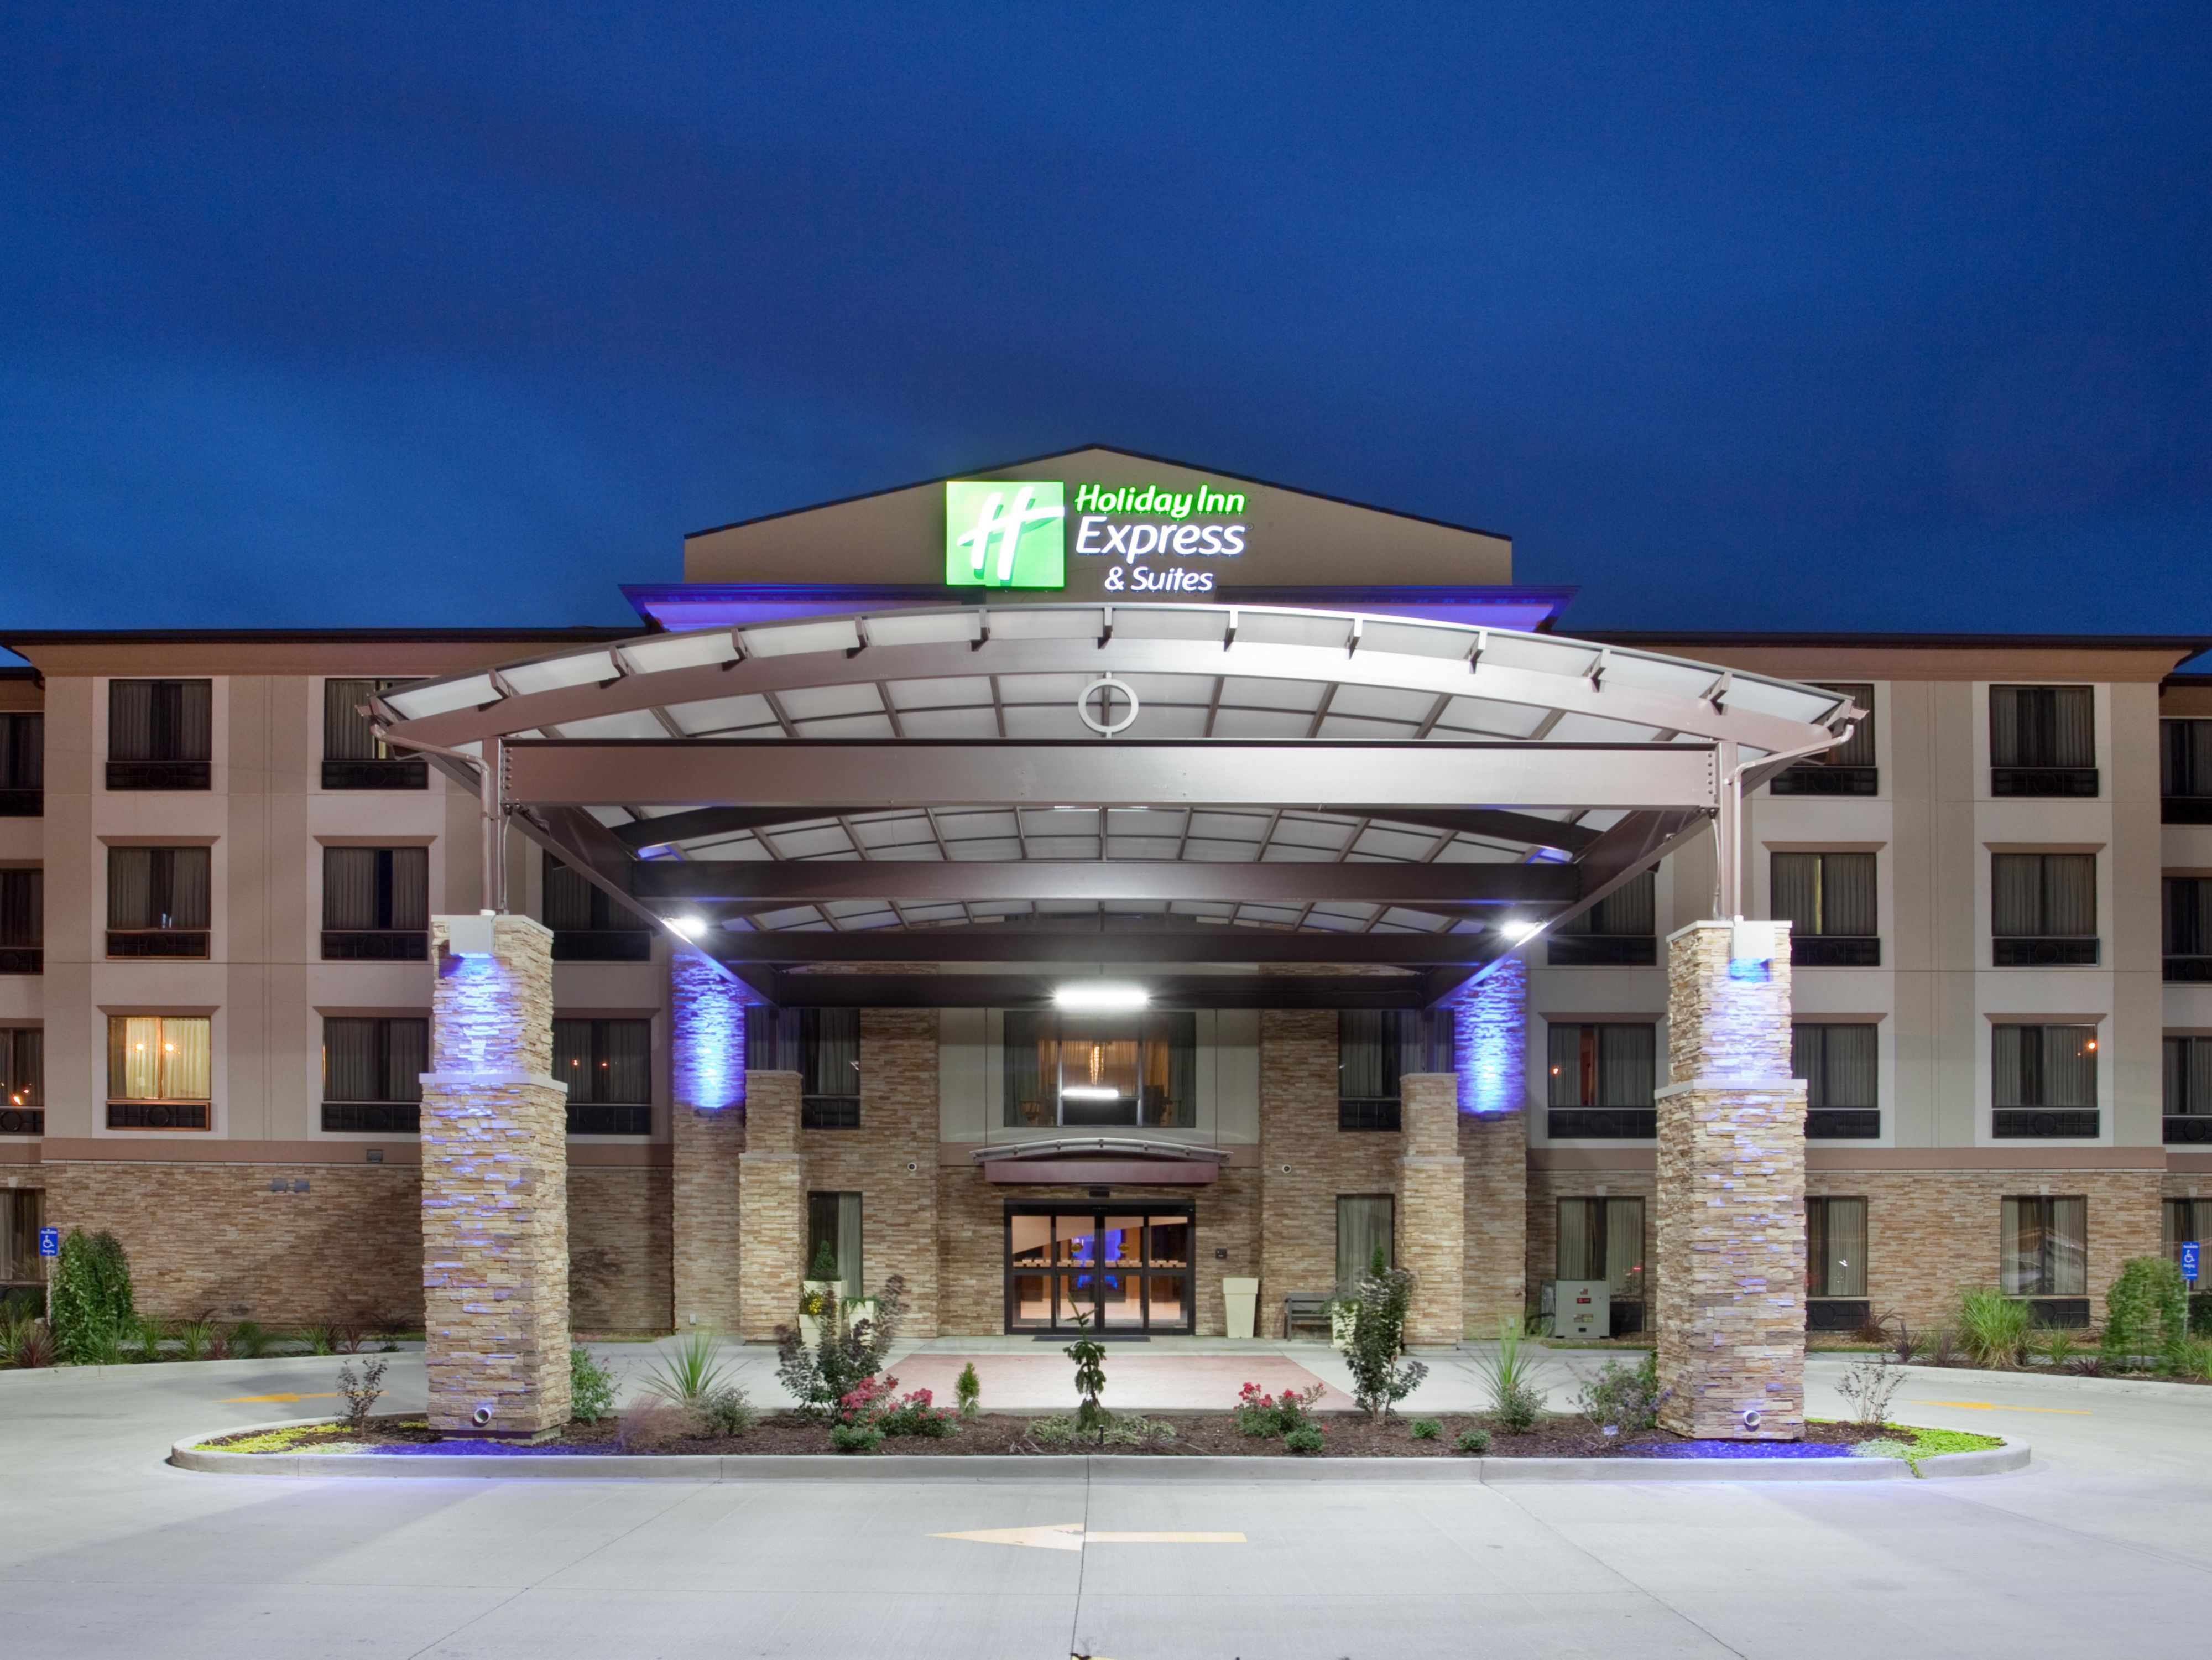 Hotels near St. Louis Airport with Pool | Holiday Inn Express & Suites St. Louis Airport